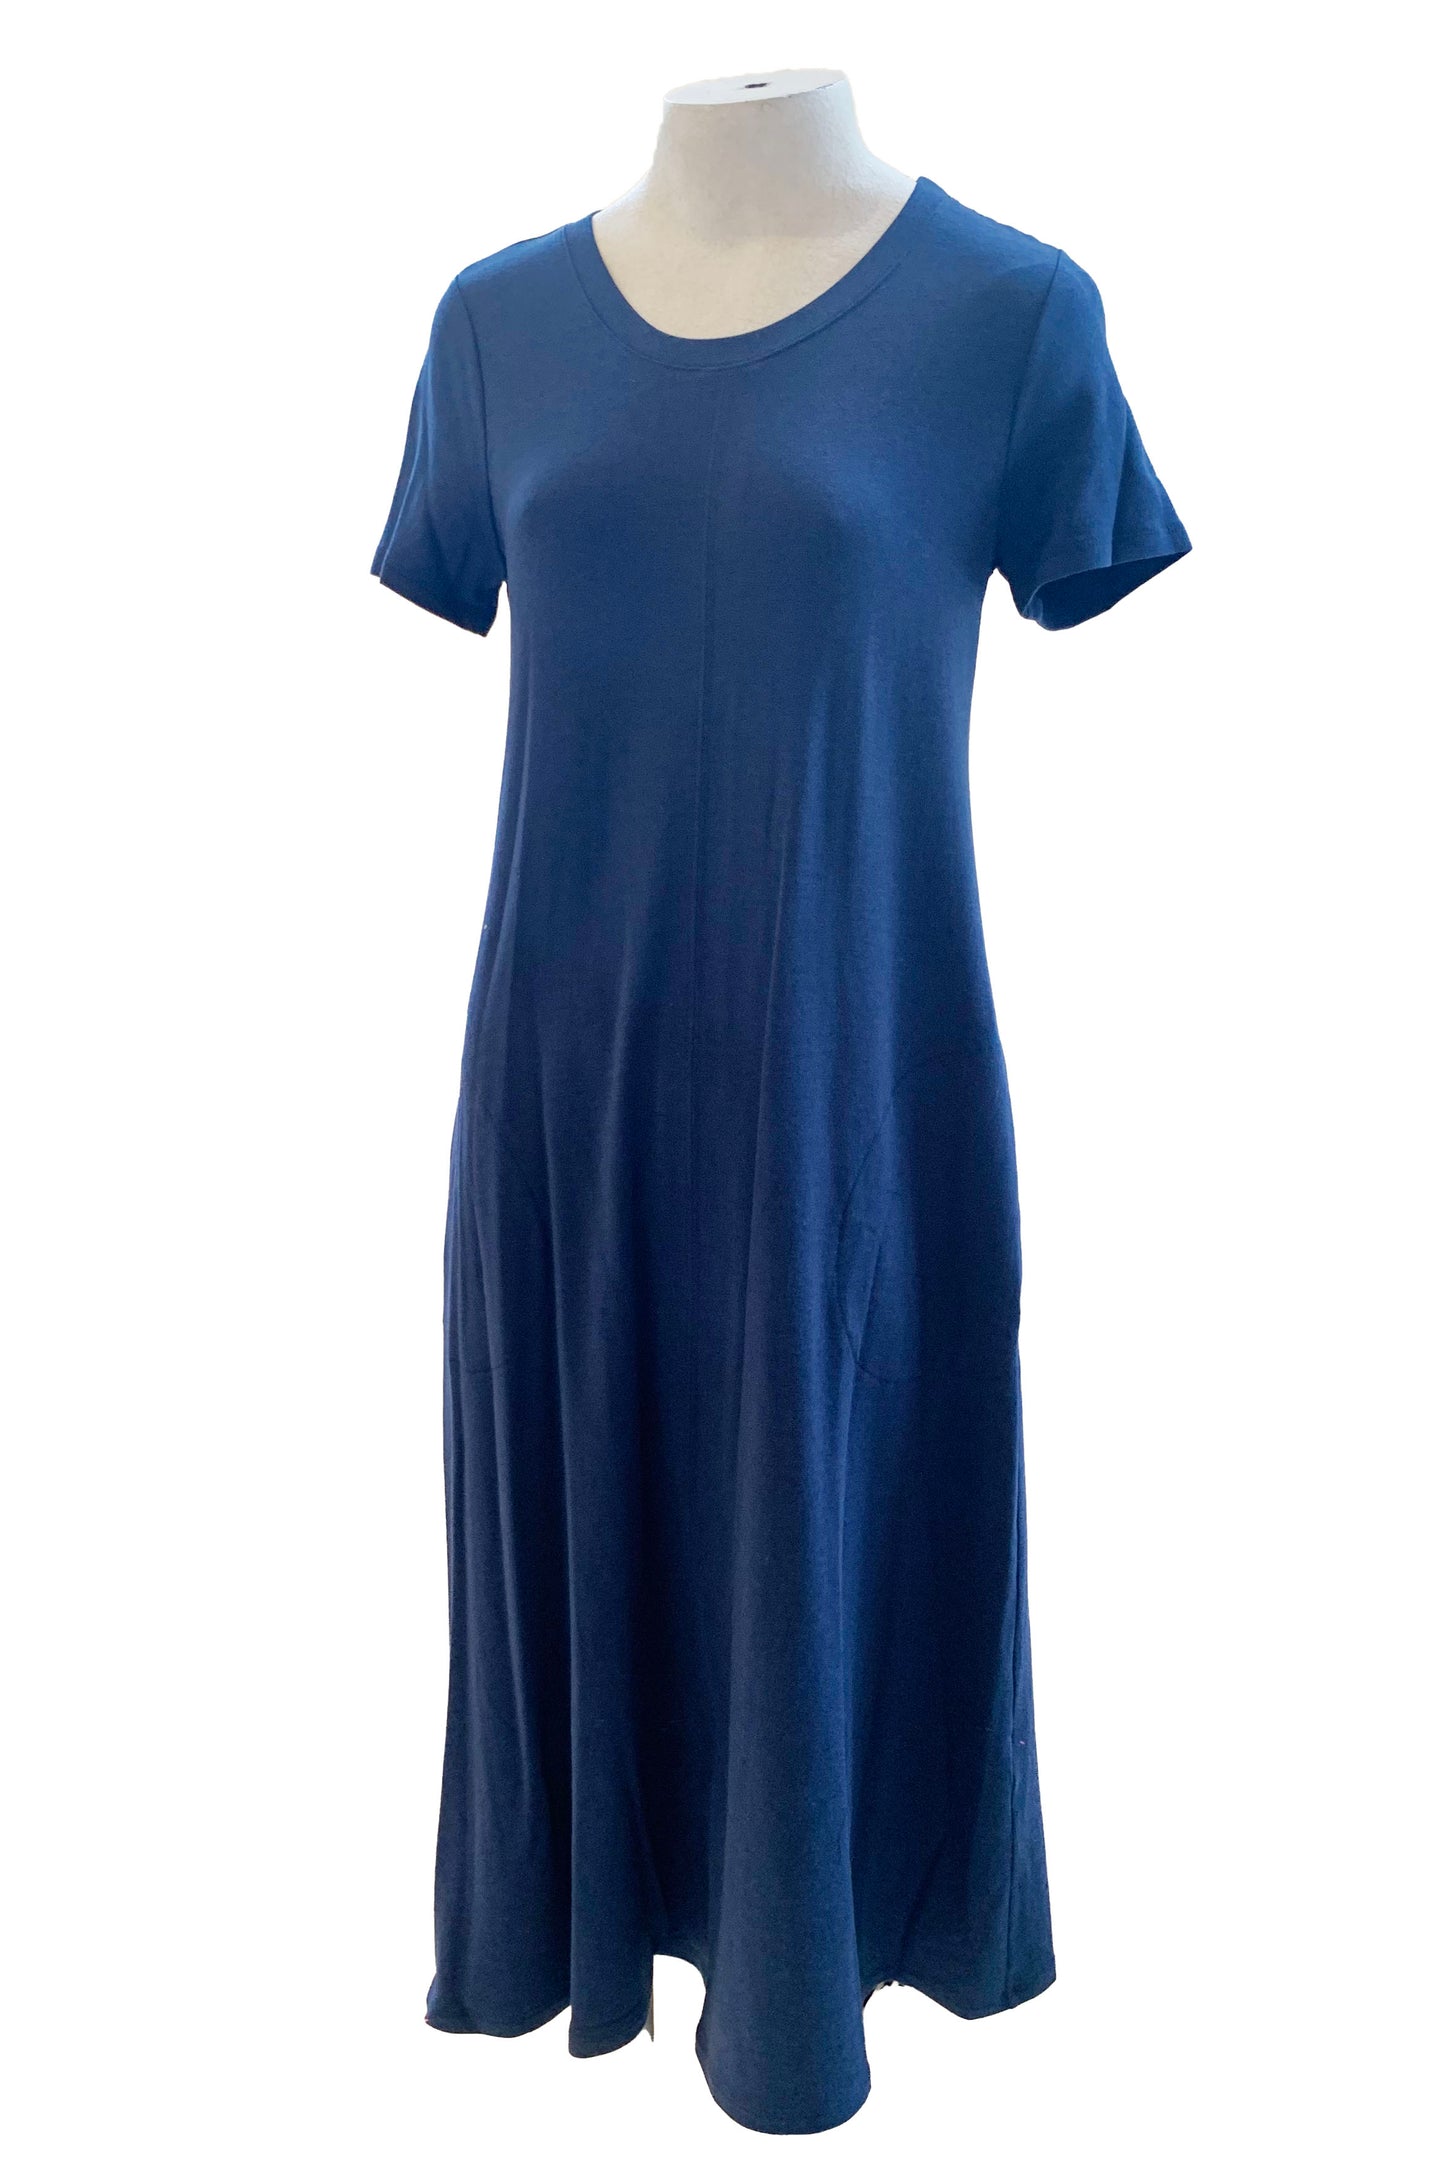 The Chloe Dress by Pure Essence in Navy is shown on a mannequin in front of a white background 